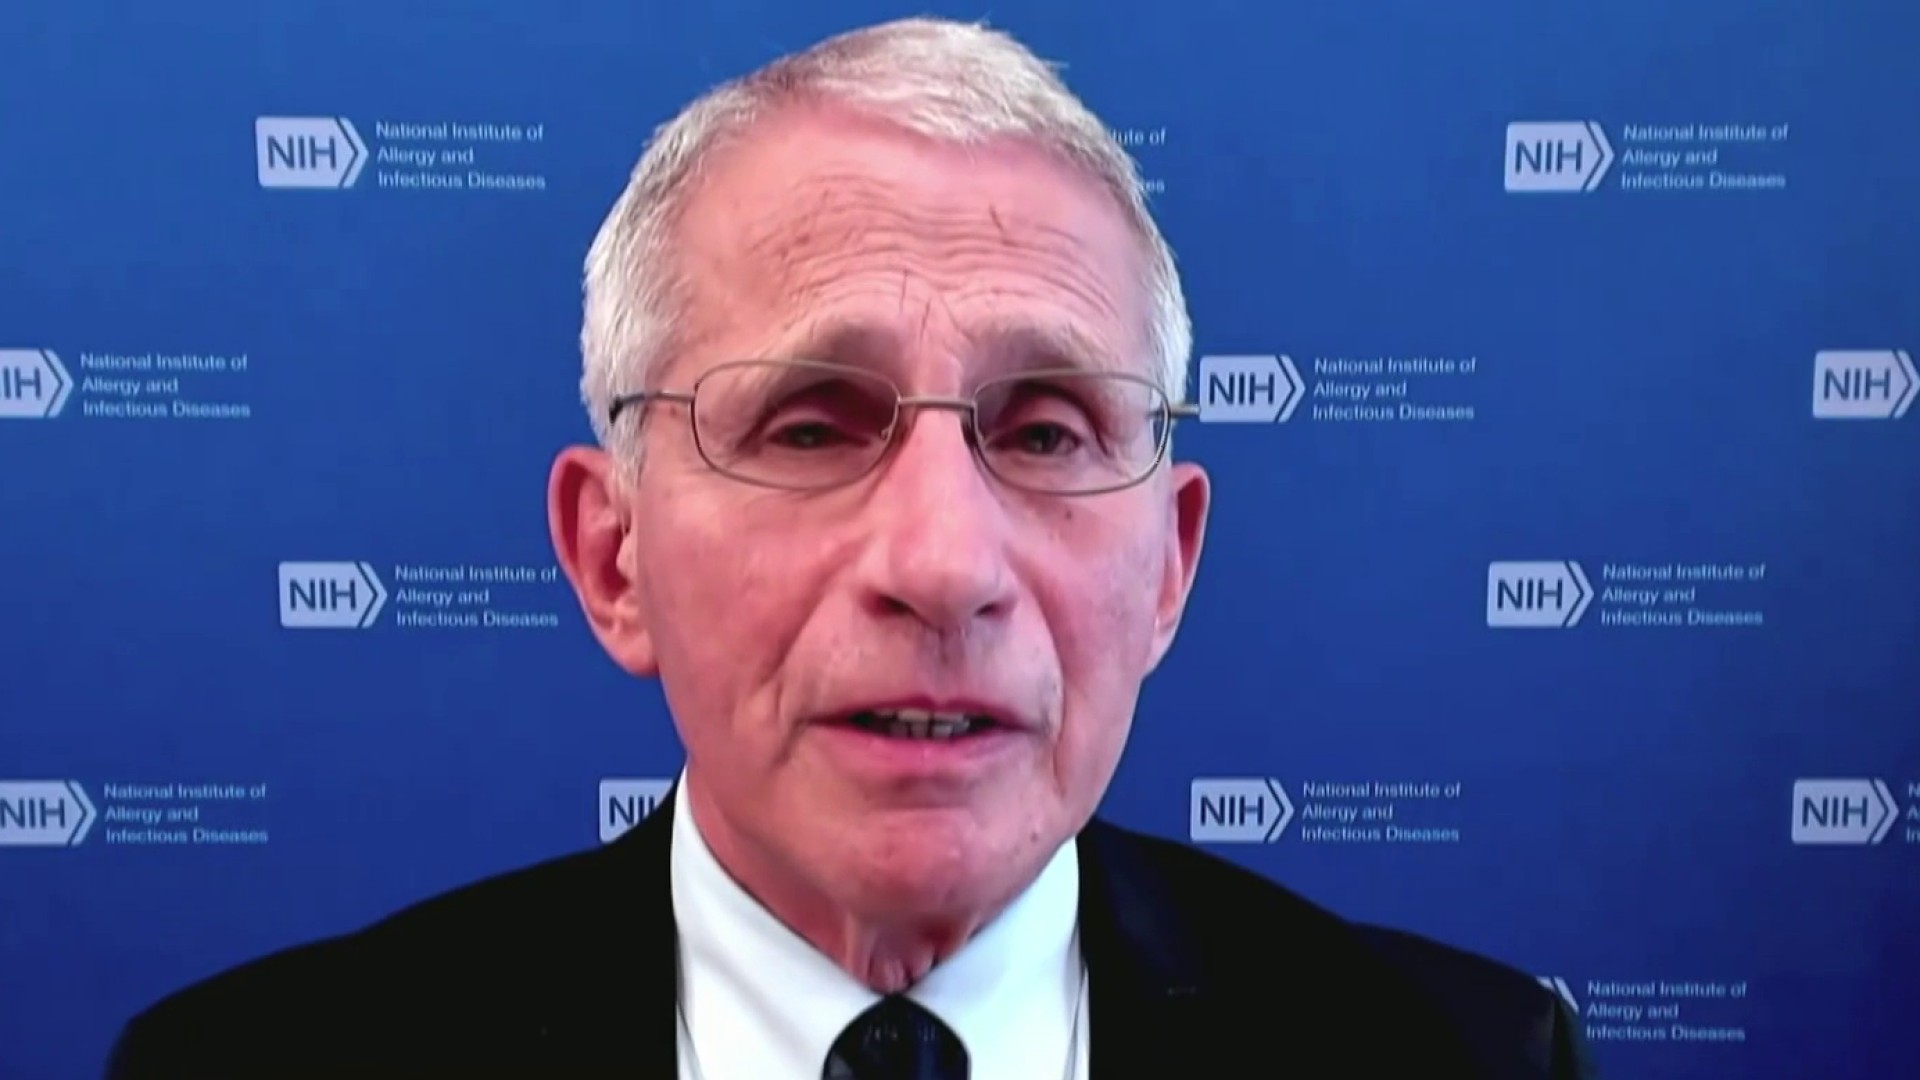 Exclusive interview with Dr. Anthony Fauci | HCS